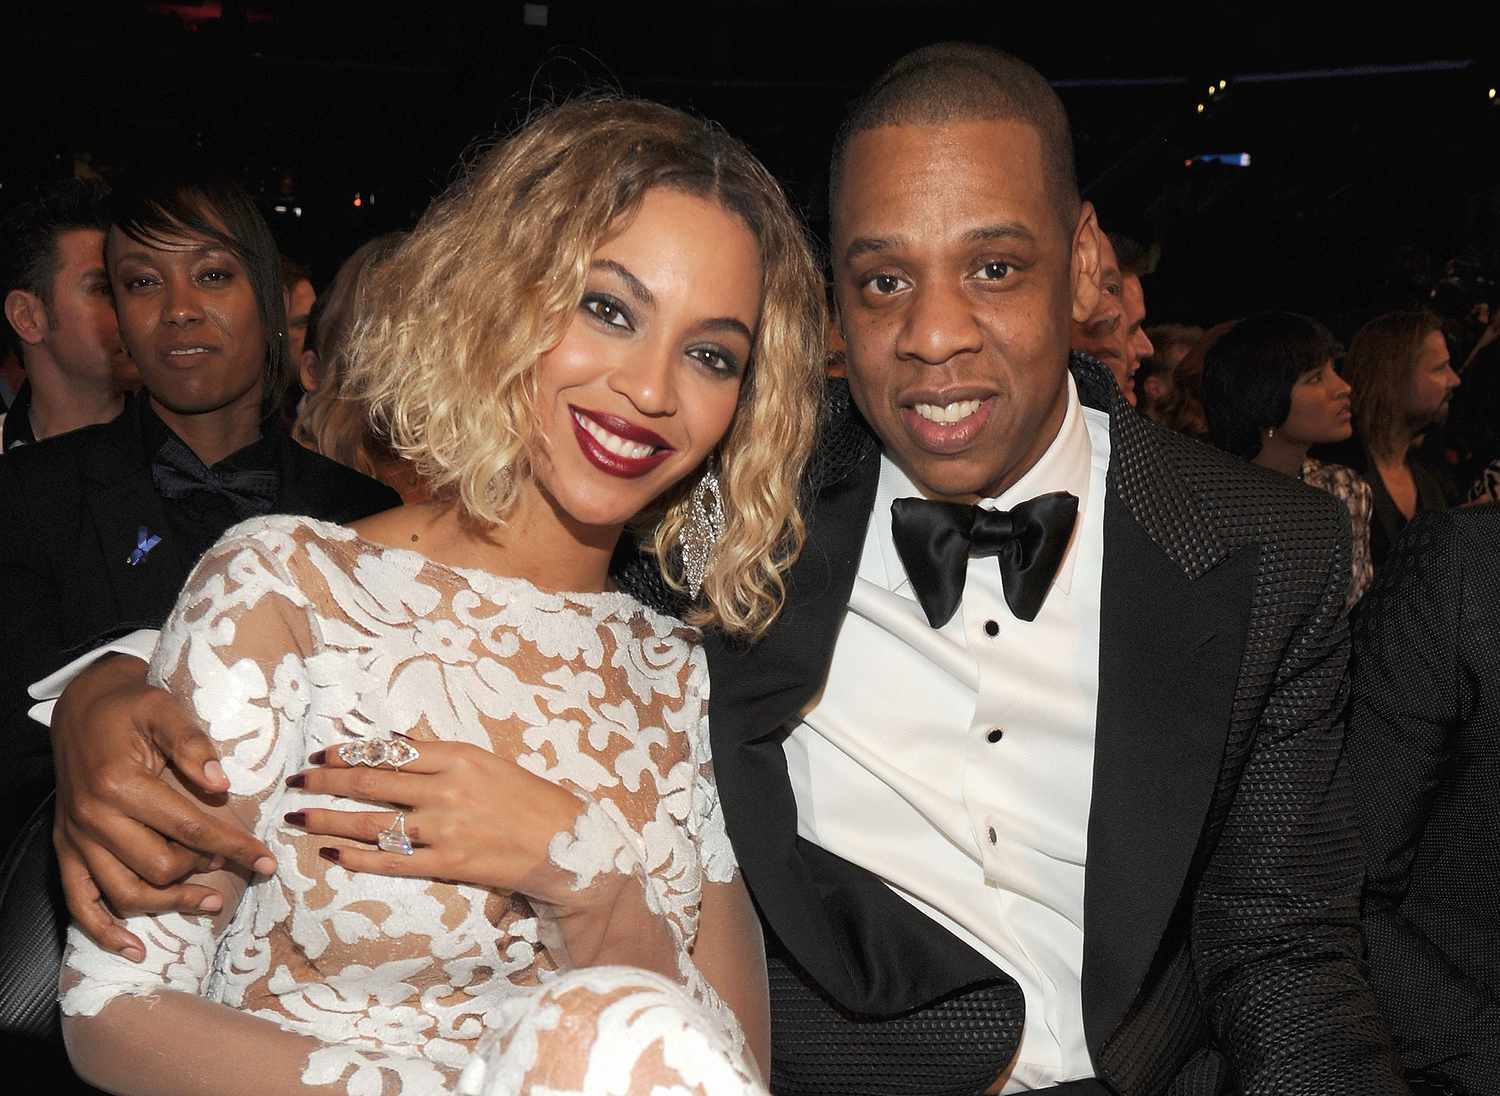 Jay-Z And Beyoncé's Romantic Getaway In France - Dinner Details That Will Leave You Envious! 18